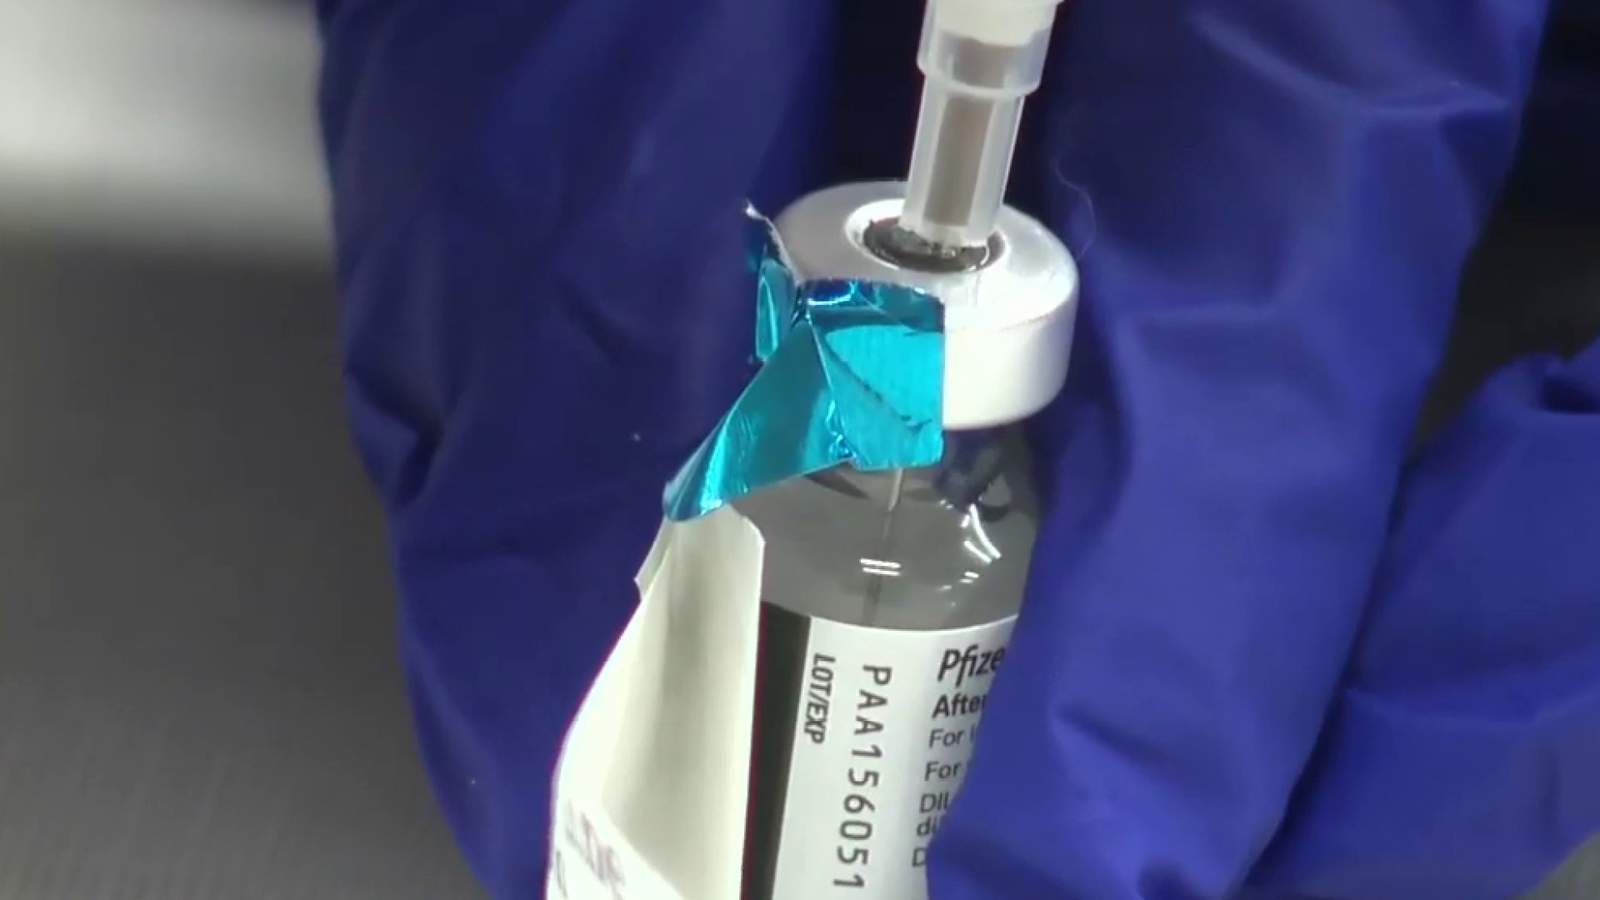 Some health care workers hesitant to get COVID-19 vaccine during initial distribution